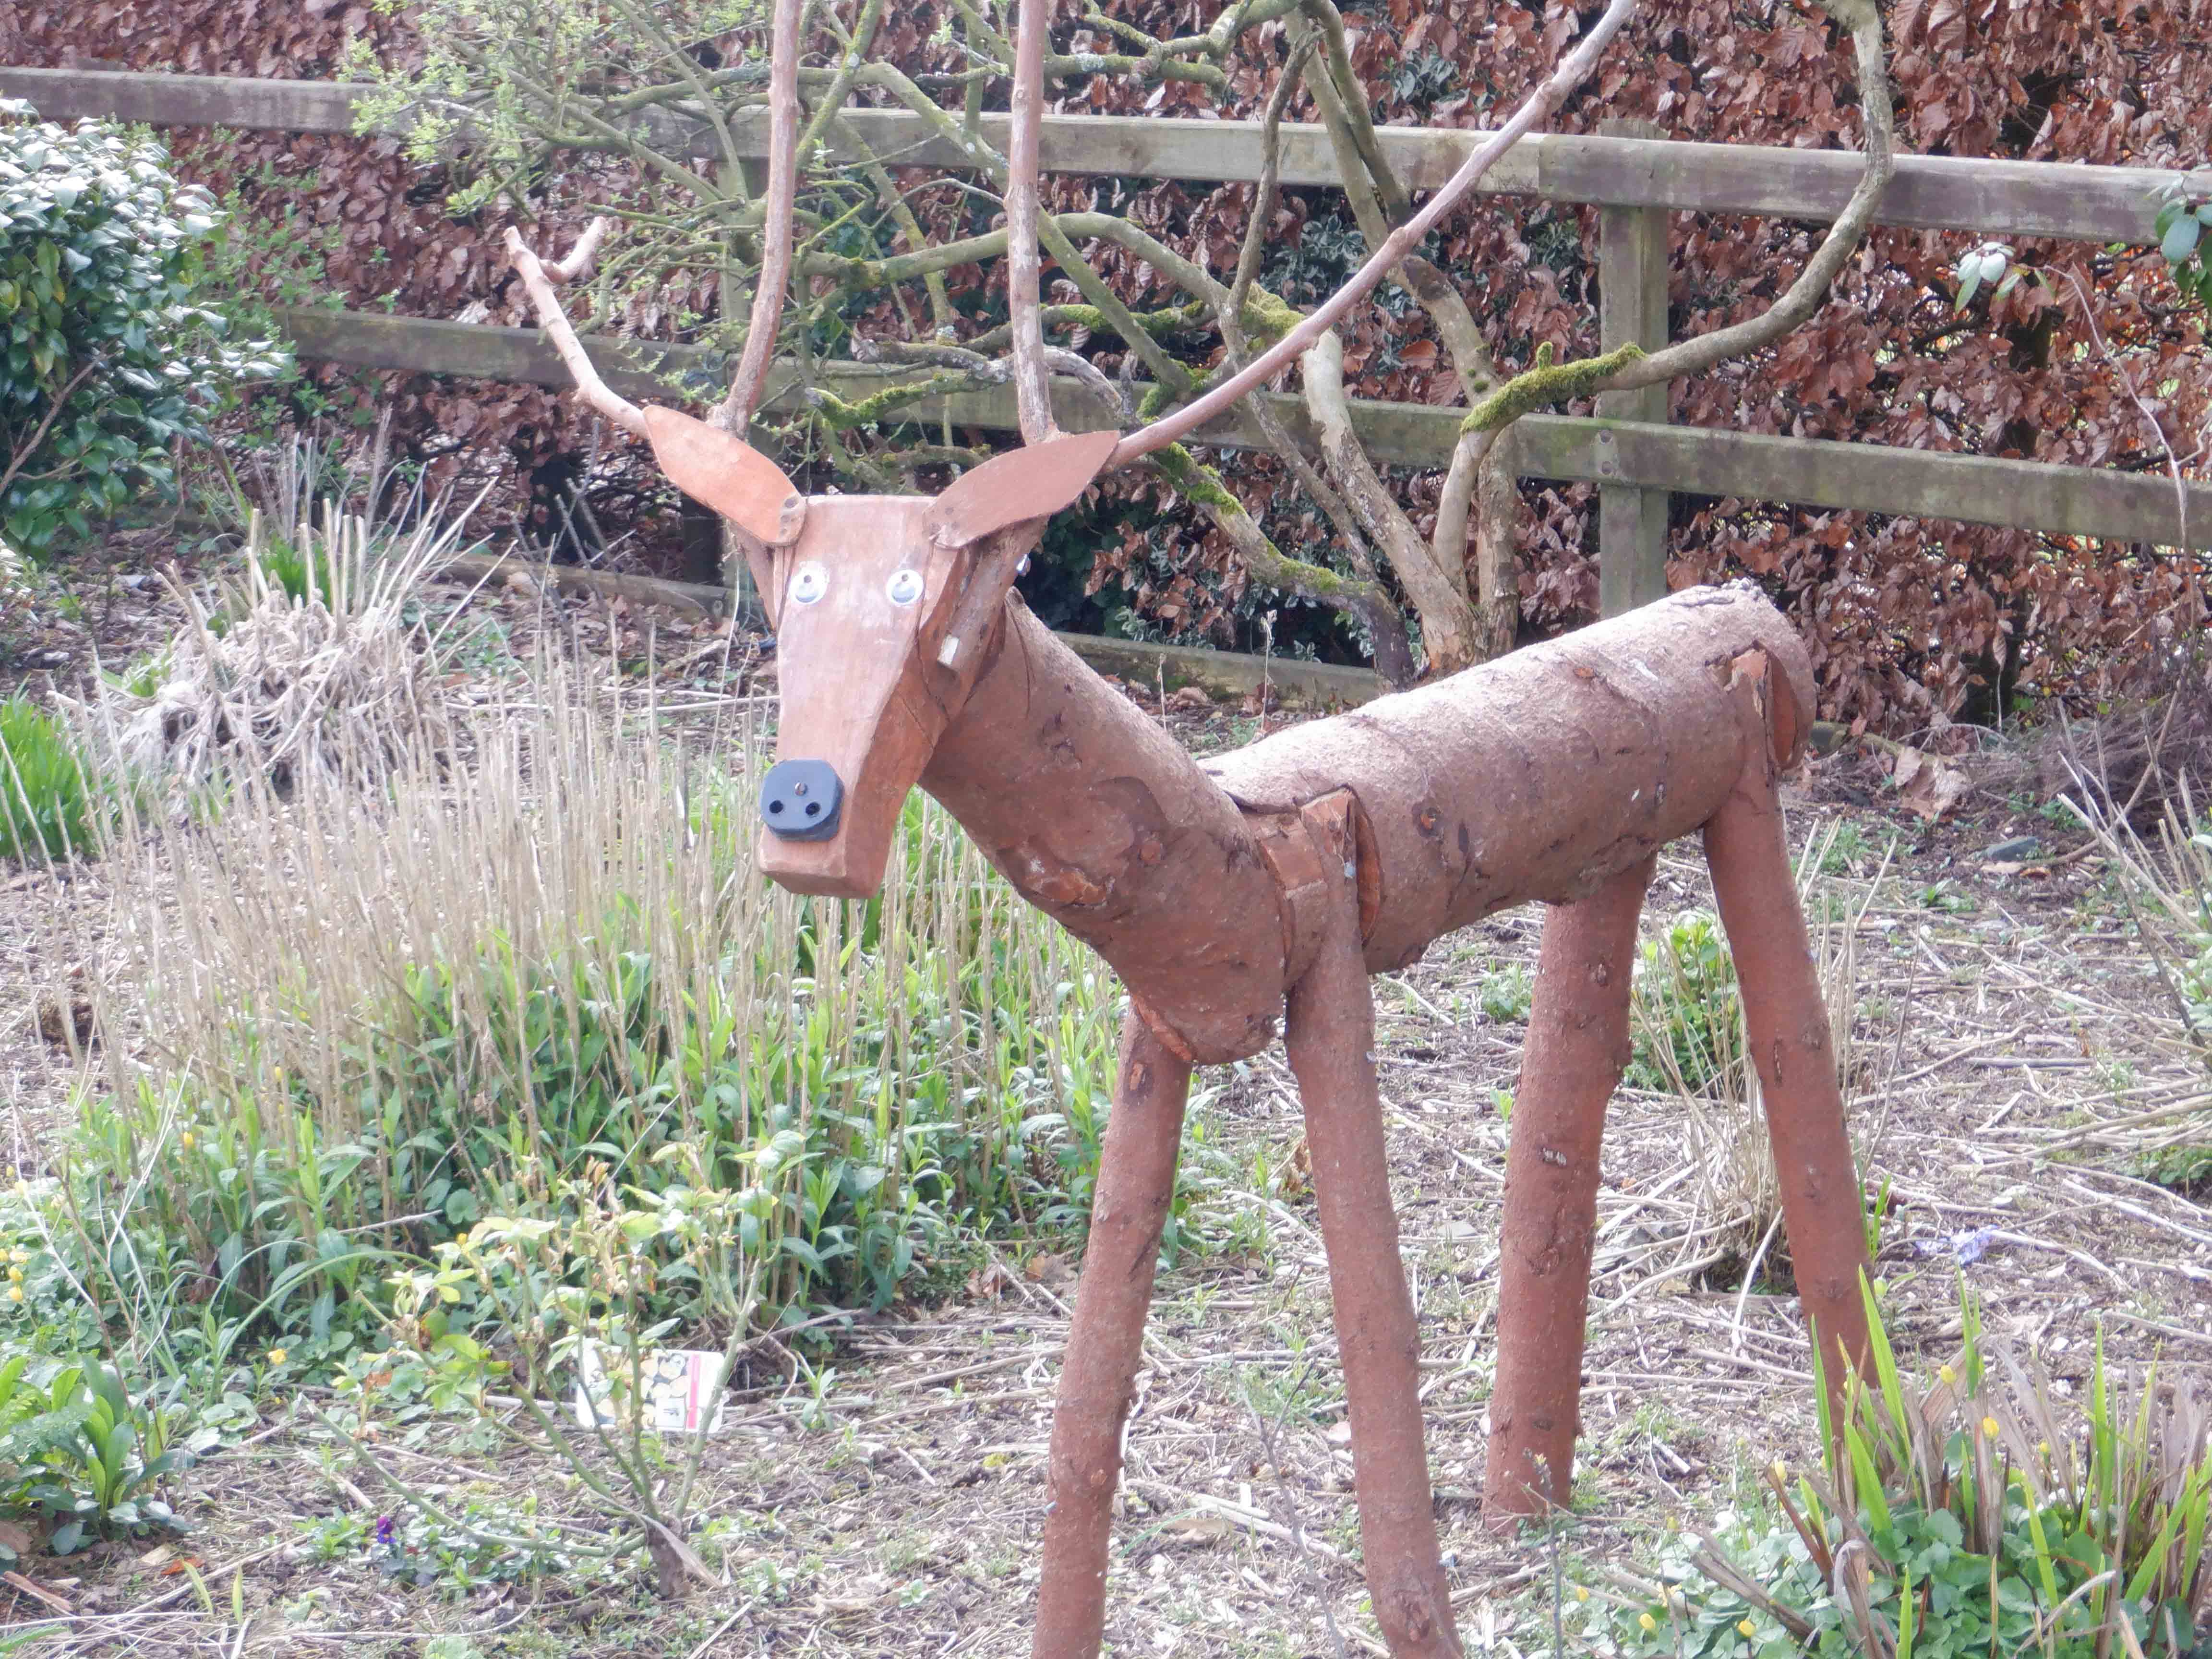 What is the deer made out of a no. 30?